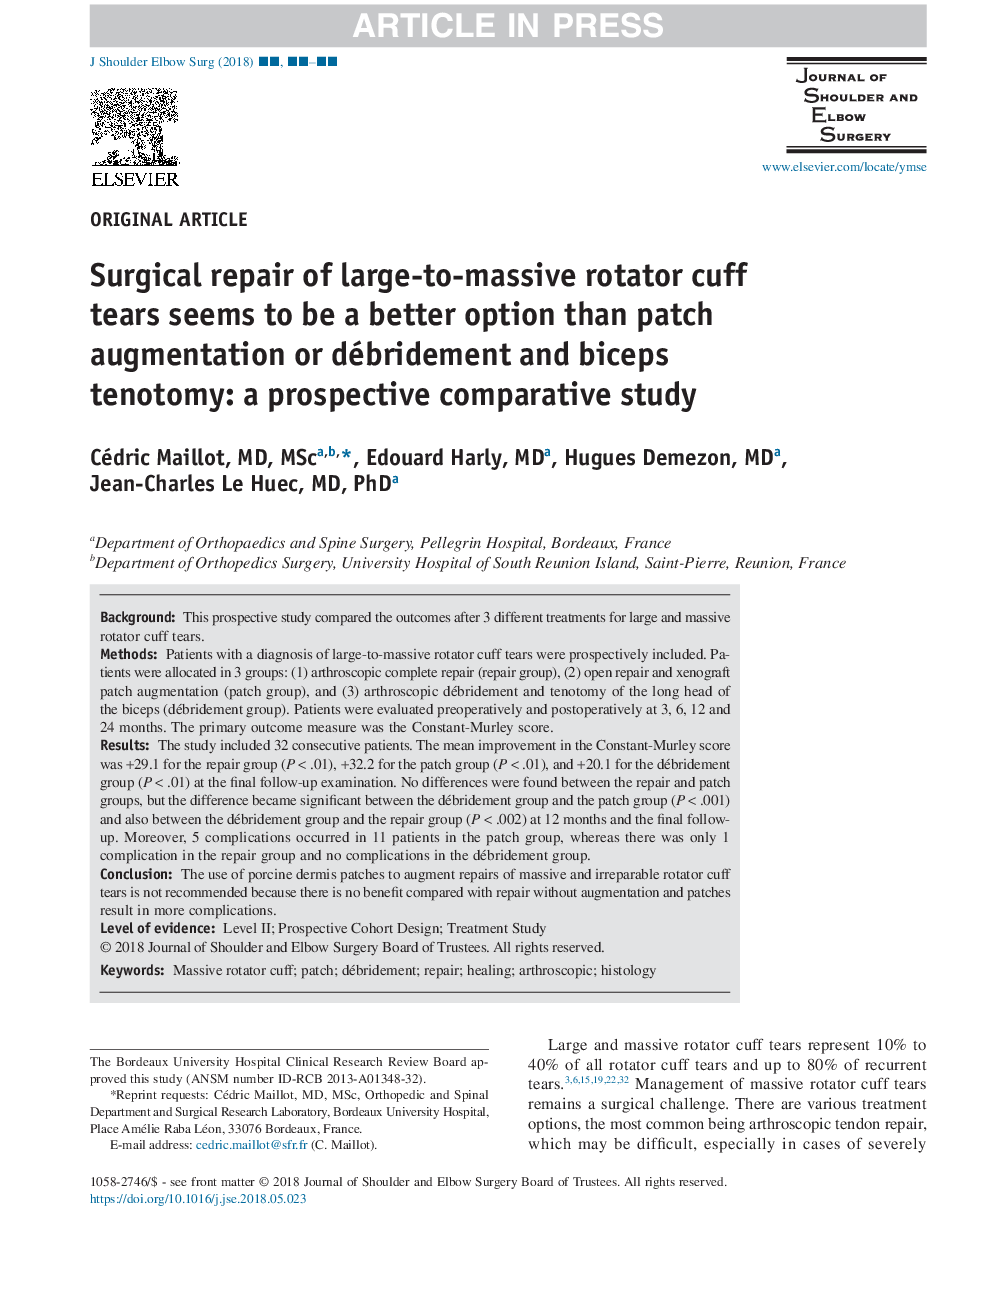 Surgical repair of large-to-massive rotator cuff tears seems to be a better option than patch augmentation or débridement and biceps tenotomy: a prospective comparative study